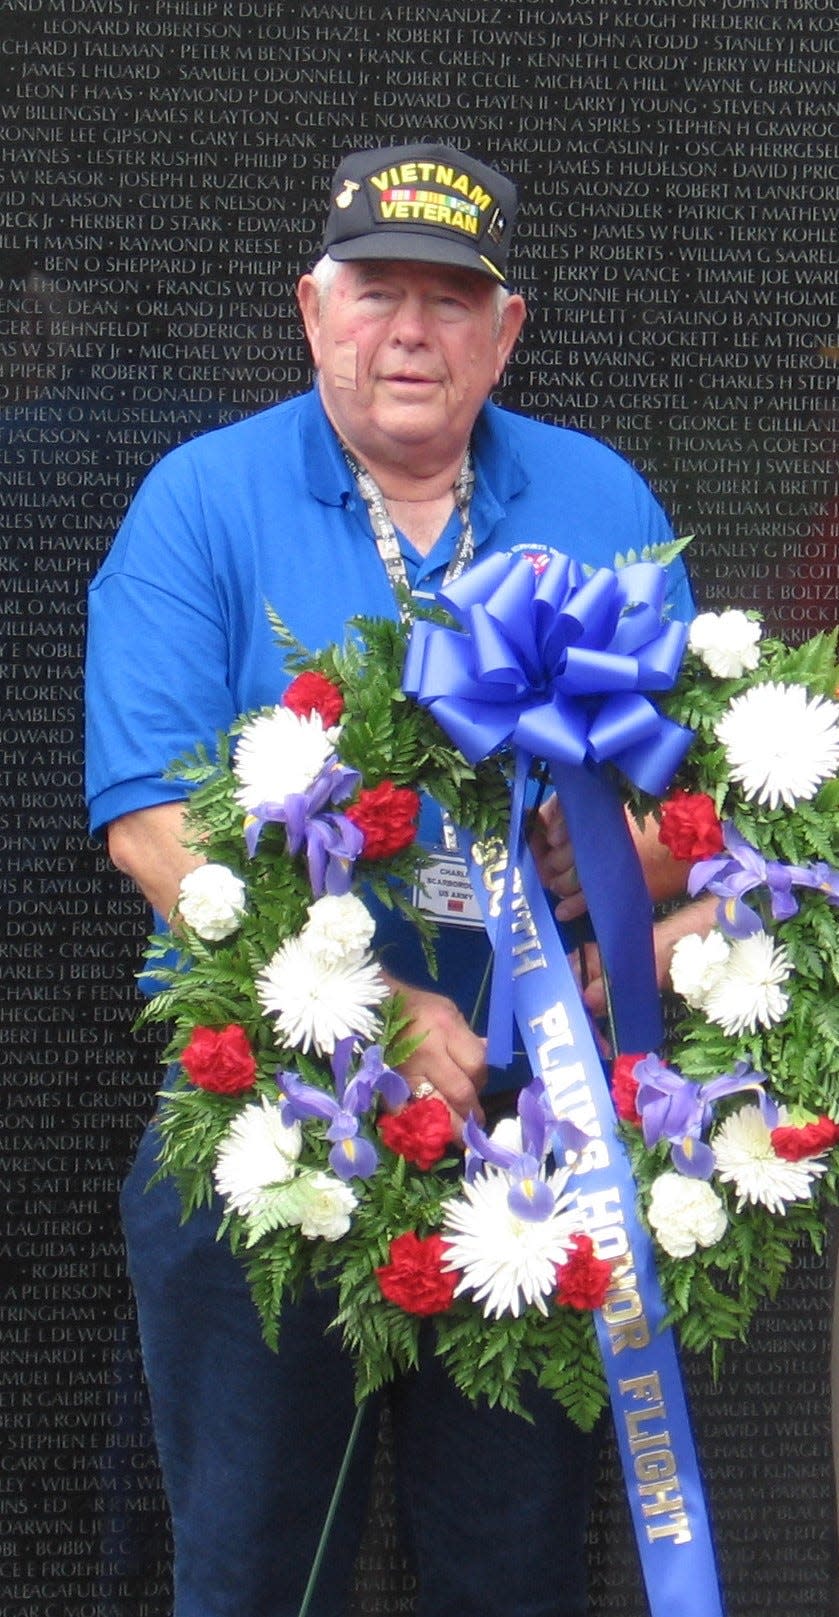 In this undated photo, Charlie Scarborough participates in a wreath laying at at Vietnam Memorial during a South Plains Honor Flight.